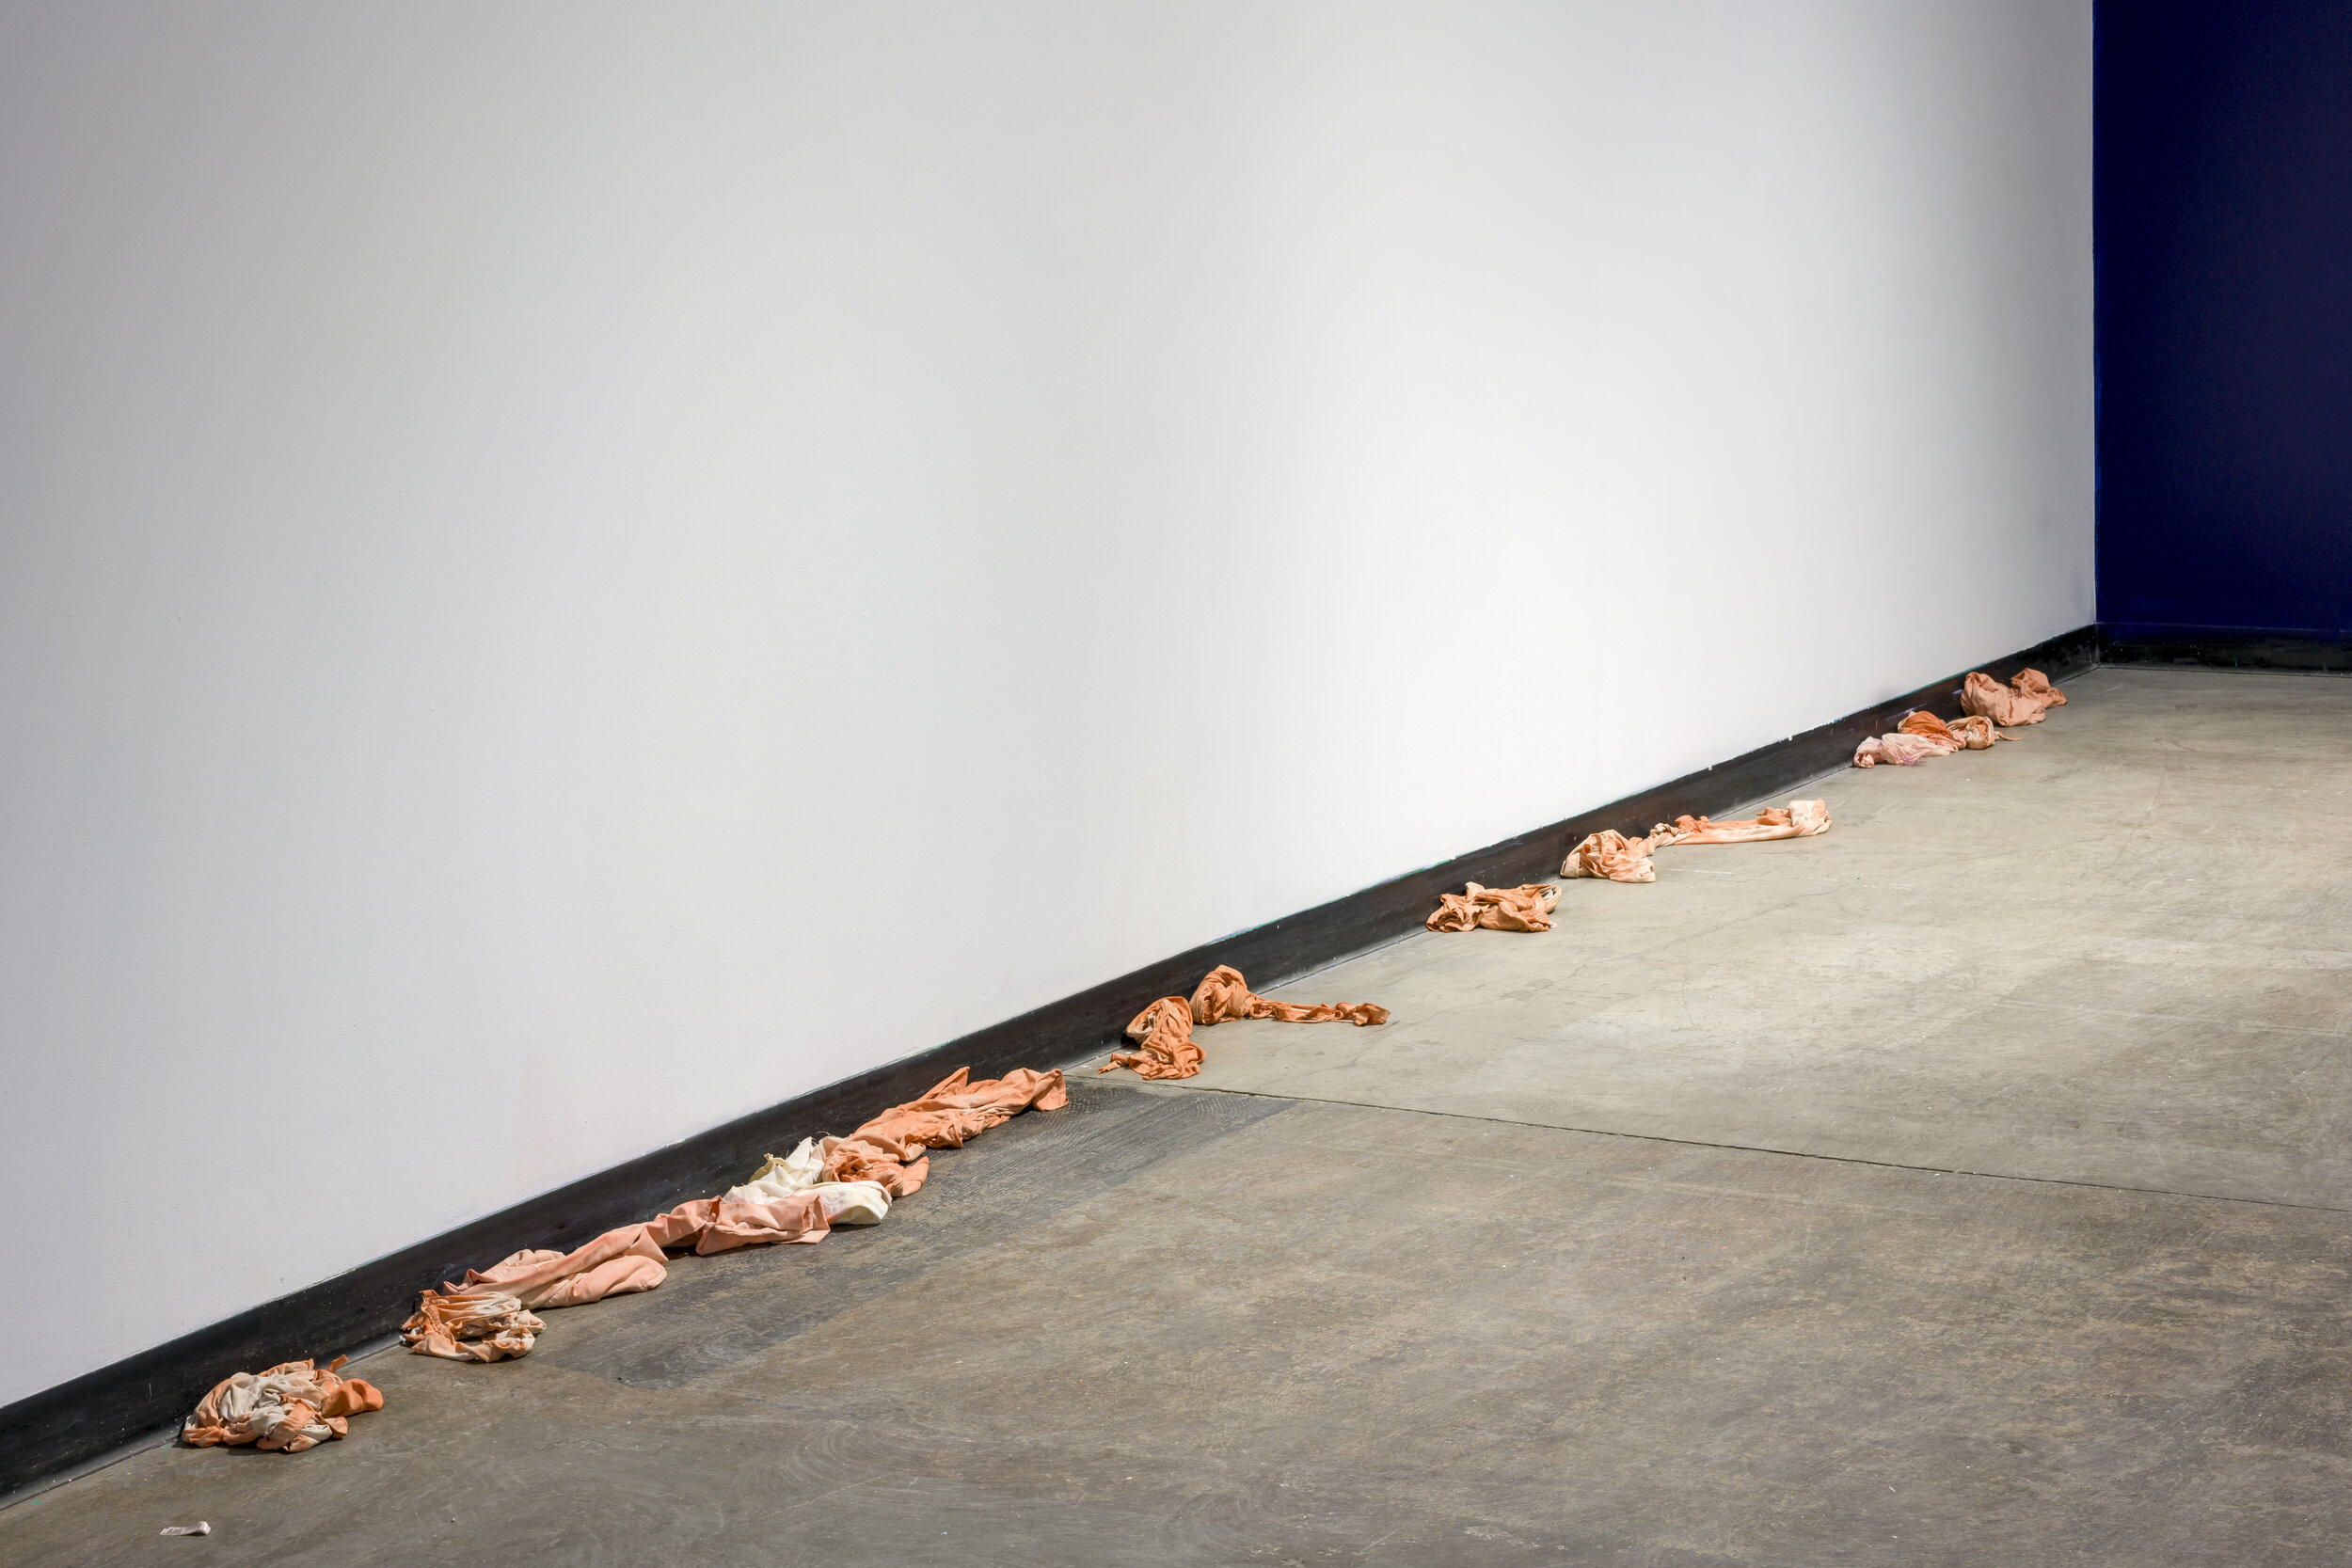  Pieces of crumpled orange and white fabric lay on the floor, pushed up against the wall. 